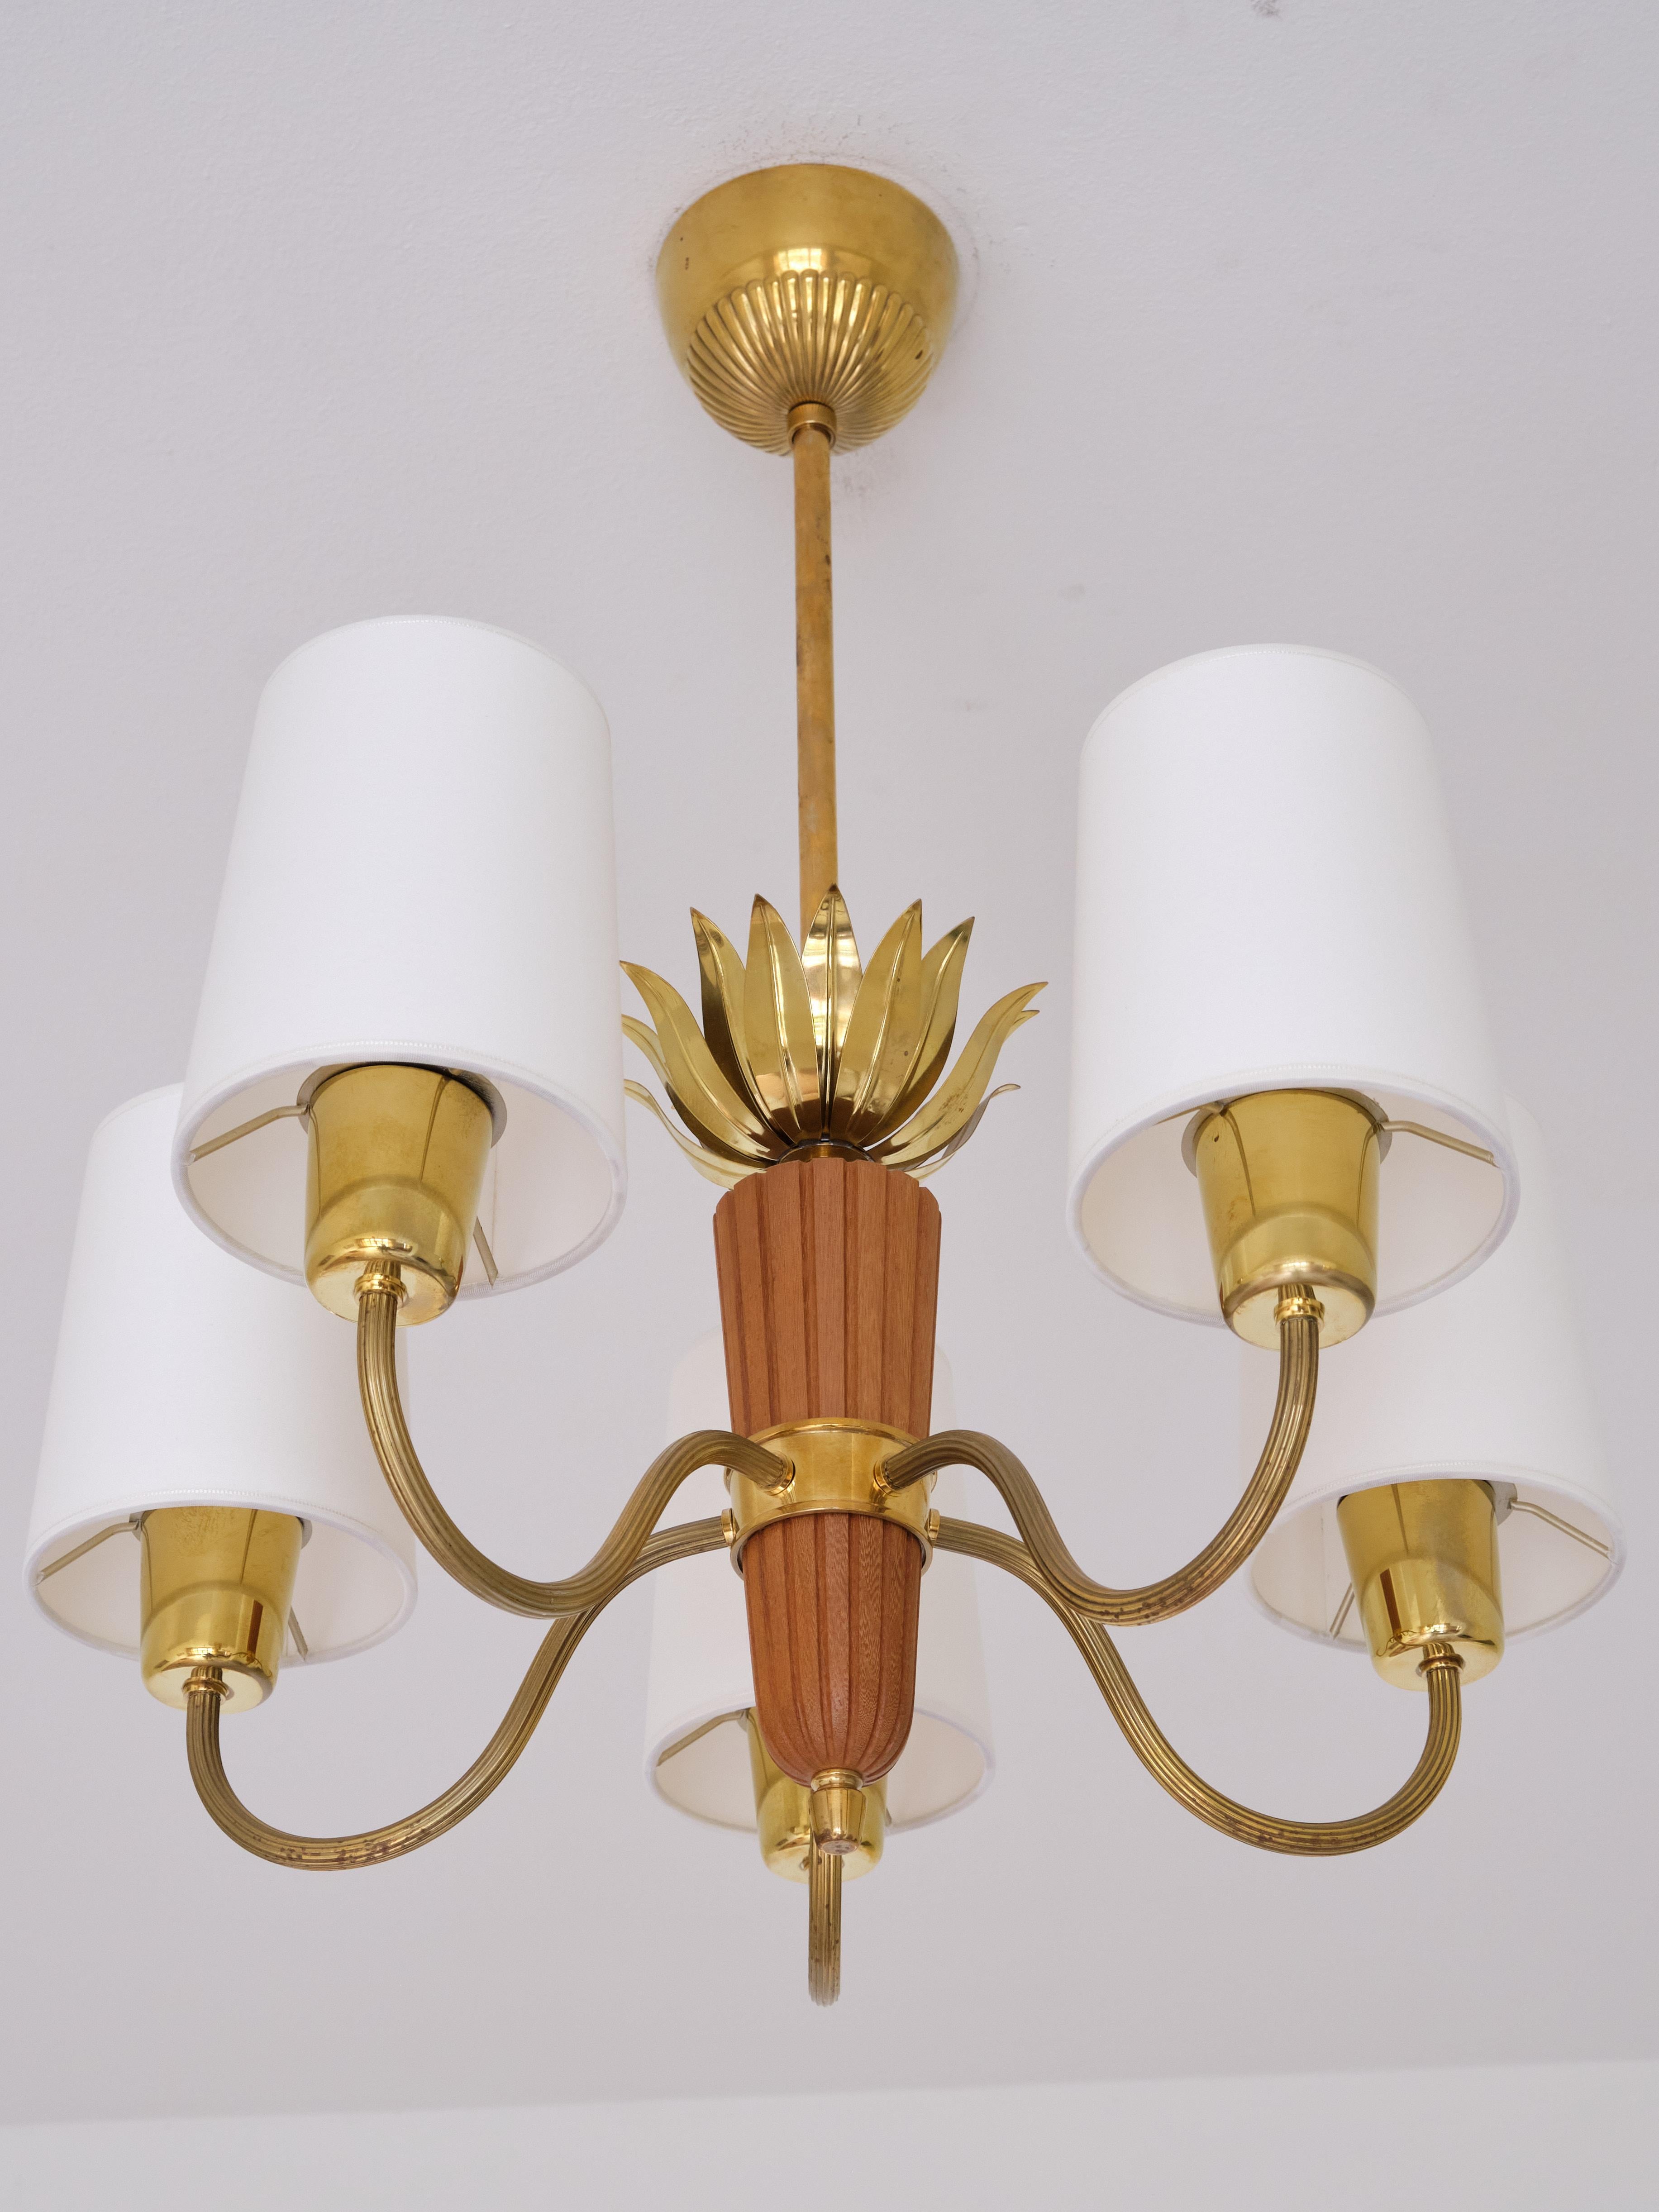 Mid-20th Century Hans Bergström Attributed Five Arm Chandelier, Brass and Oak, ASEA Sweden, 1950s For Sale